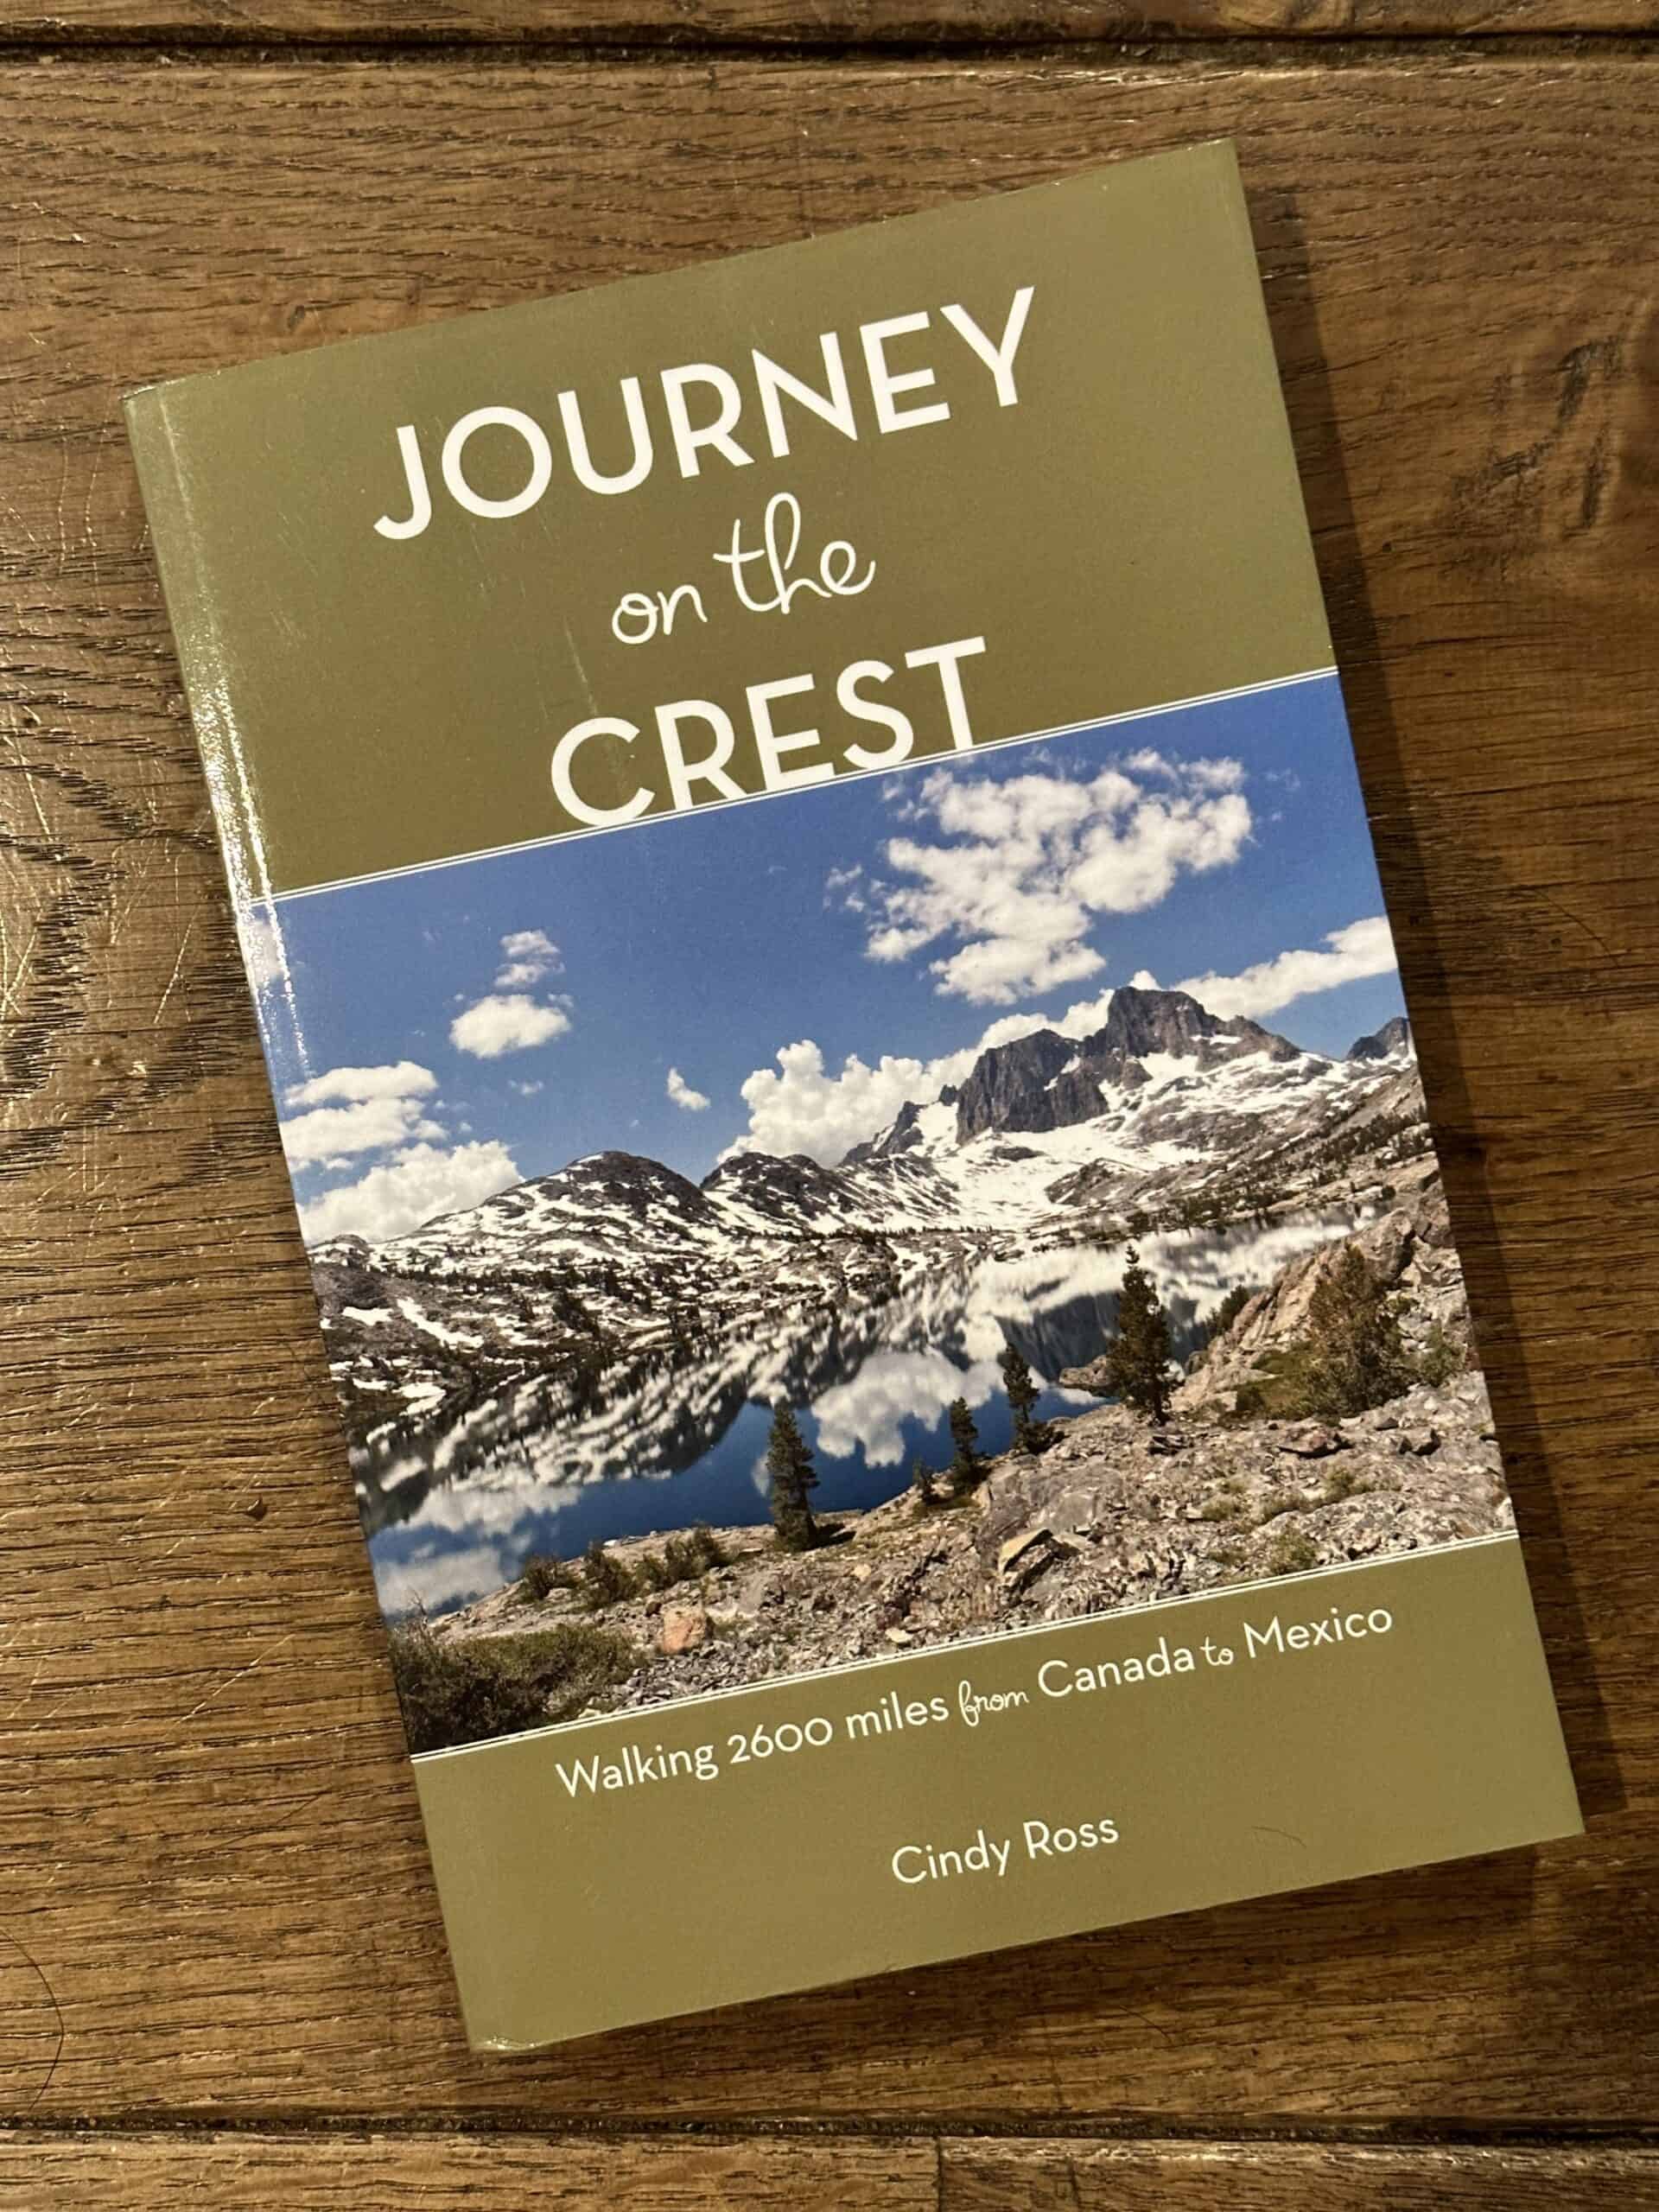 Cover of the book by Cindy Ross, "Journey on the Crest"